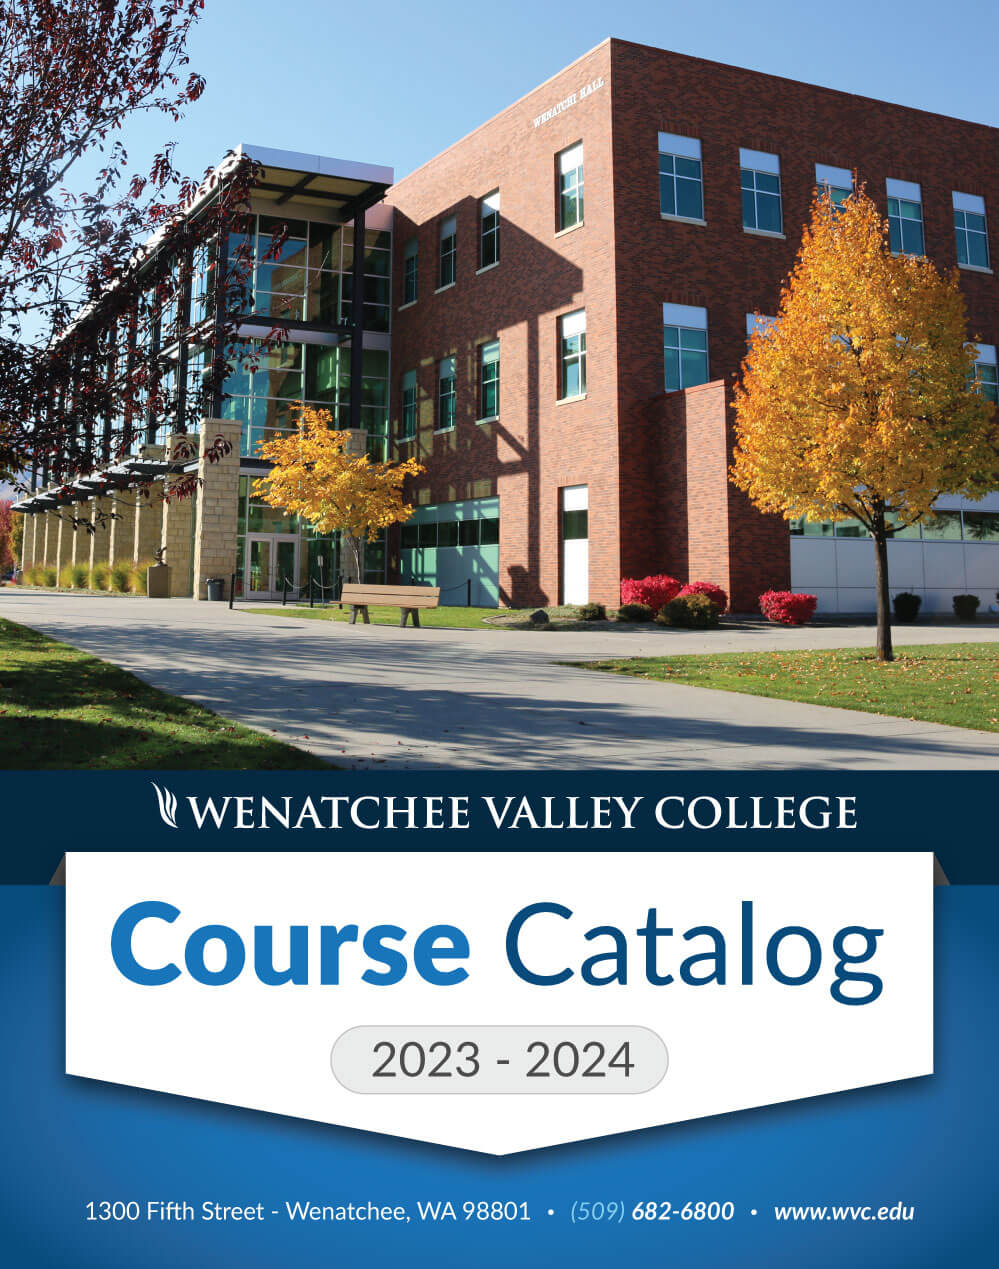 Catalog cover image with text that says "Wenatchee Valley College Catalog 2023-2024"